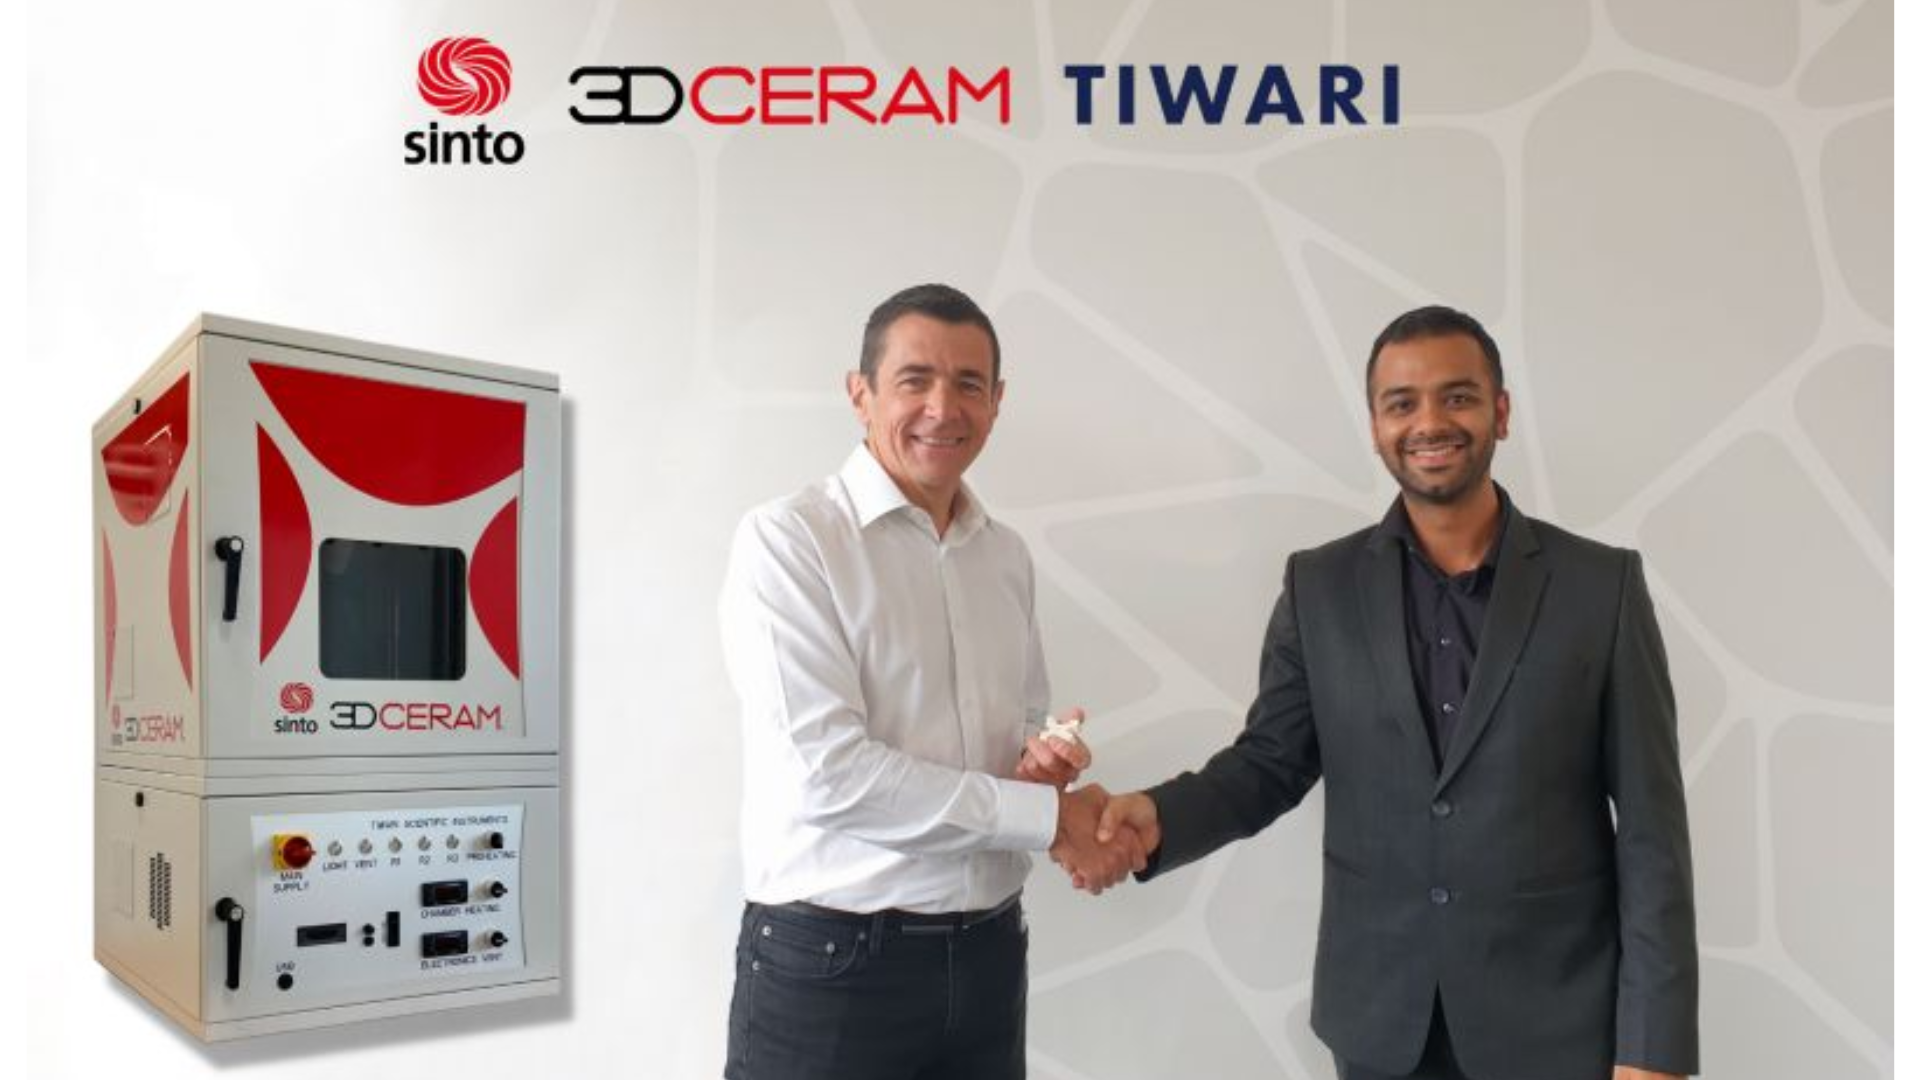 3DCeram expands 3D printing technology, becoming majority shareholder of start-up TIWARI Scientific Instruments, created within the European Space Agency